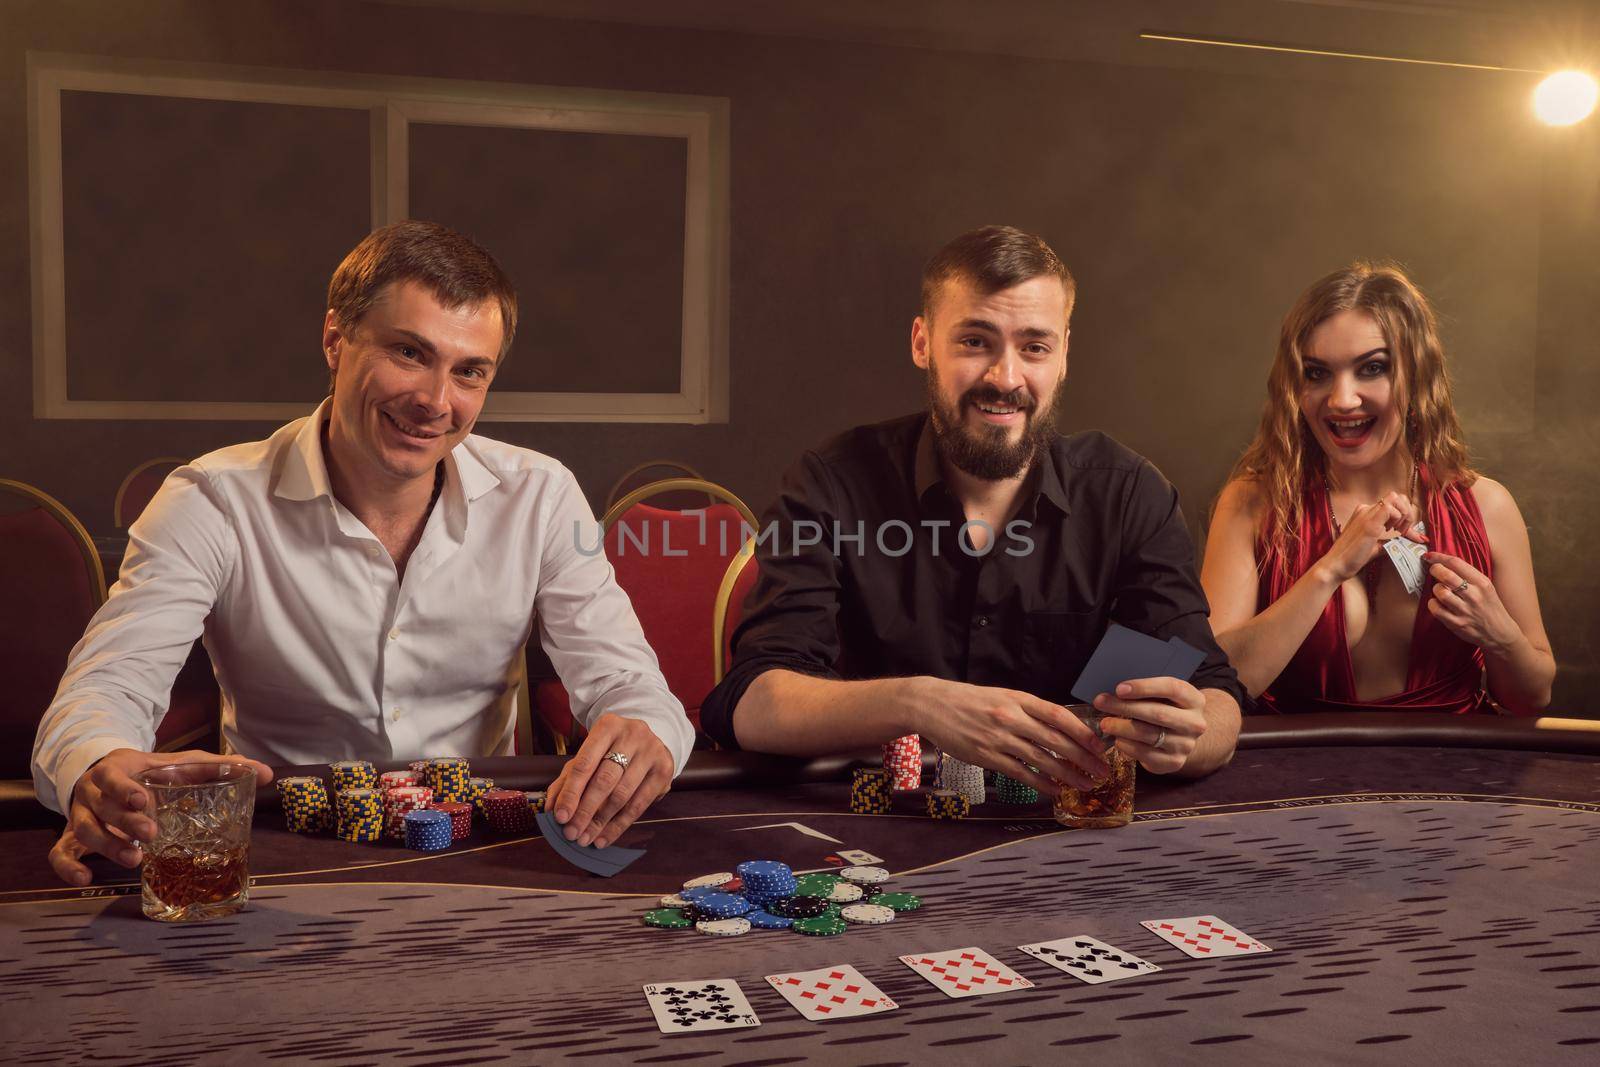 Two wealthy friends and beautiful female are playing poker at casino. They are making bets waiting for a big win, smiling and having a good time while posing sitting at the table against a yellow backlight on smoke background. Cards, chips, money, gambling, entertainment concept.